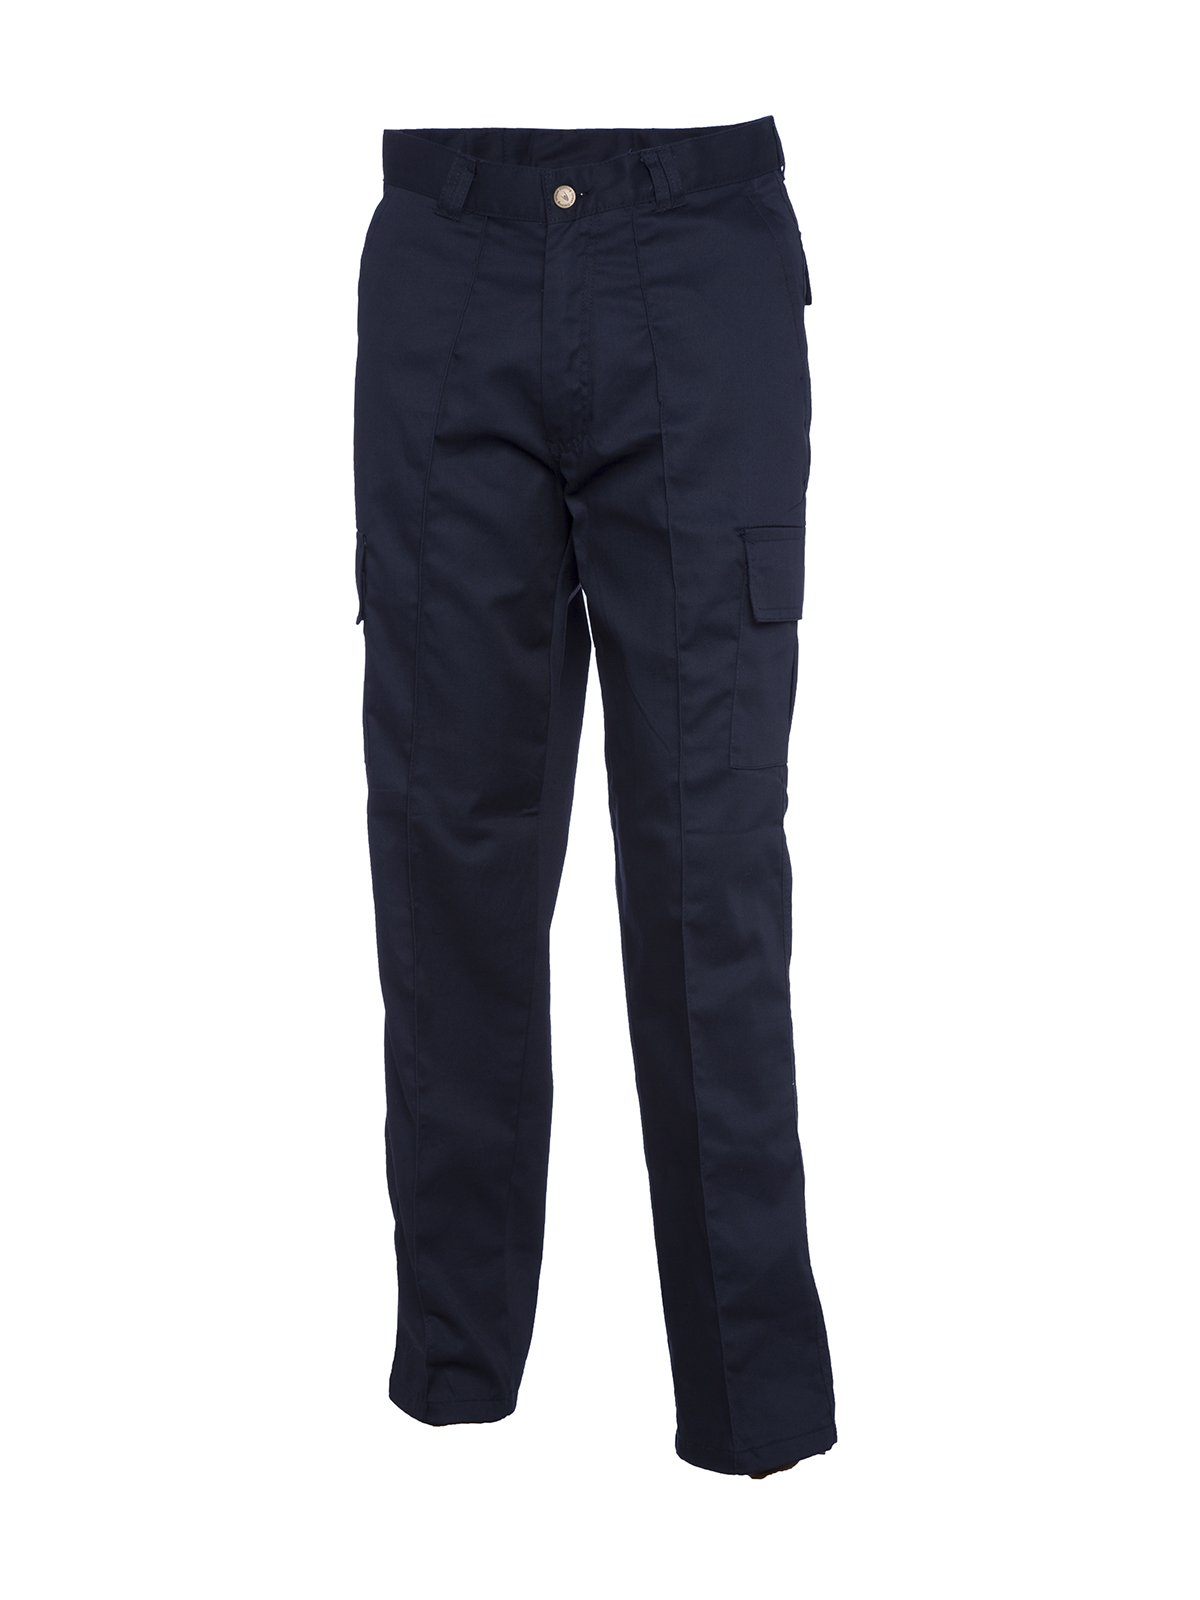 Cargo Trousers, Navy Blue - 30R